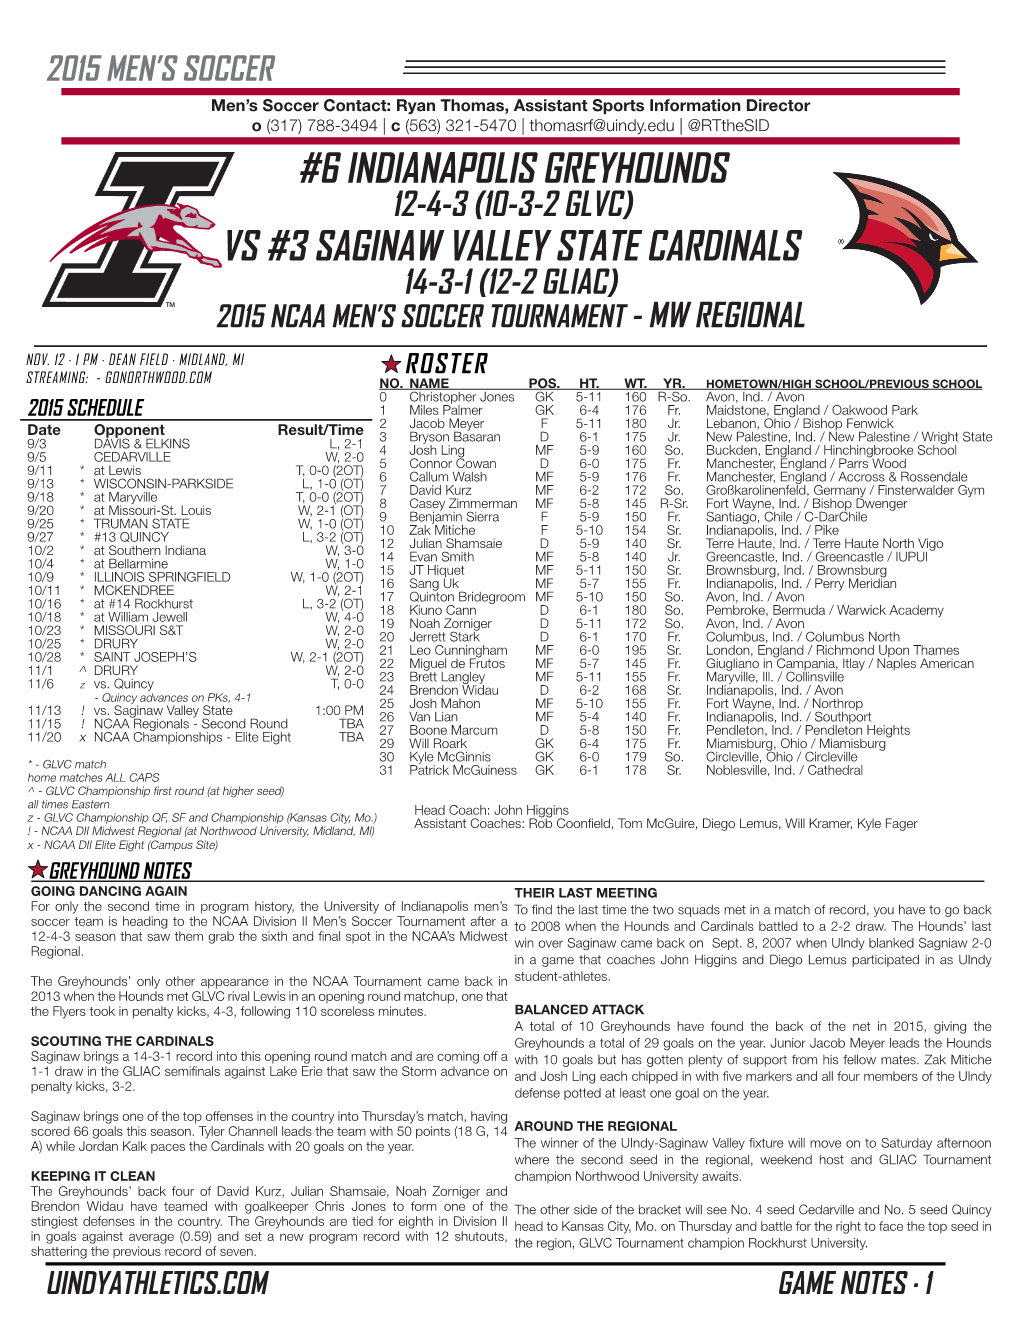 6 Indianapolis Greyhounds Vs #3 Saginaw Valley State